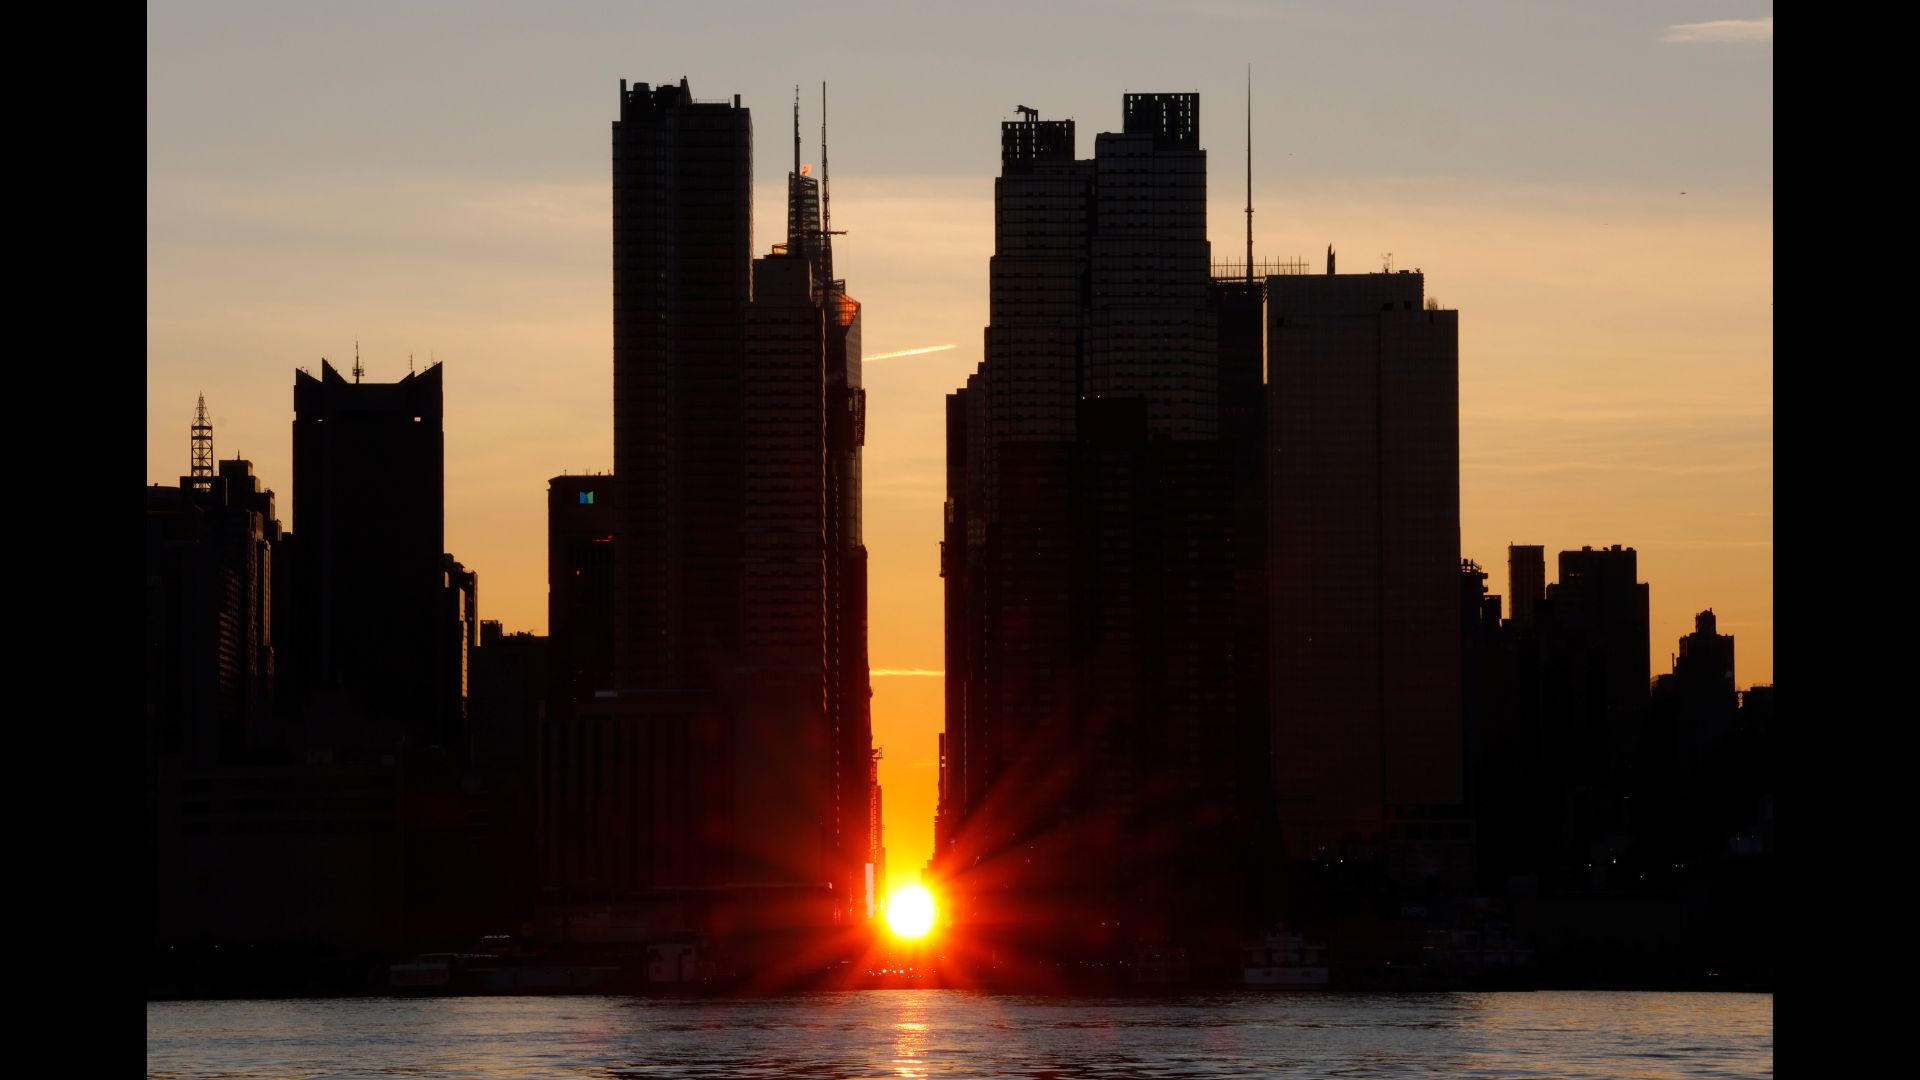  'Manhattanhenge' returns: Where and when to see the sun 'kiss the grid' in New York next week 